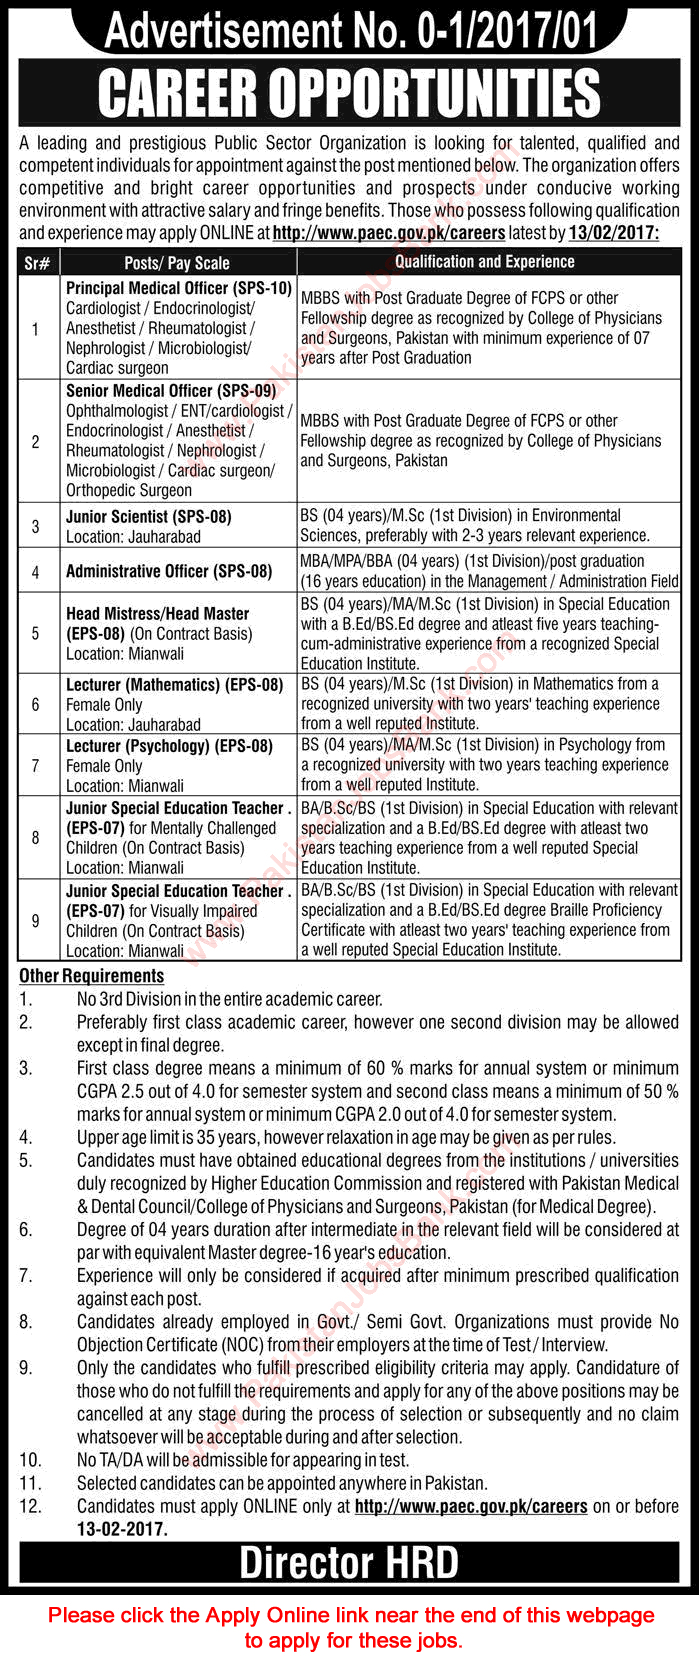 PAEC Jobs 2017 January Apply Online Medical Officers, Lecturers, Special Education Teachers & Others Latest